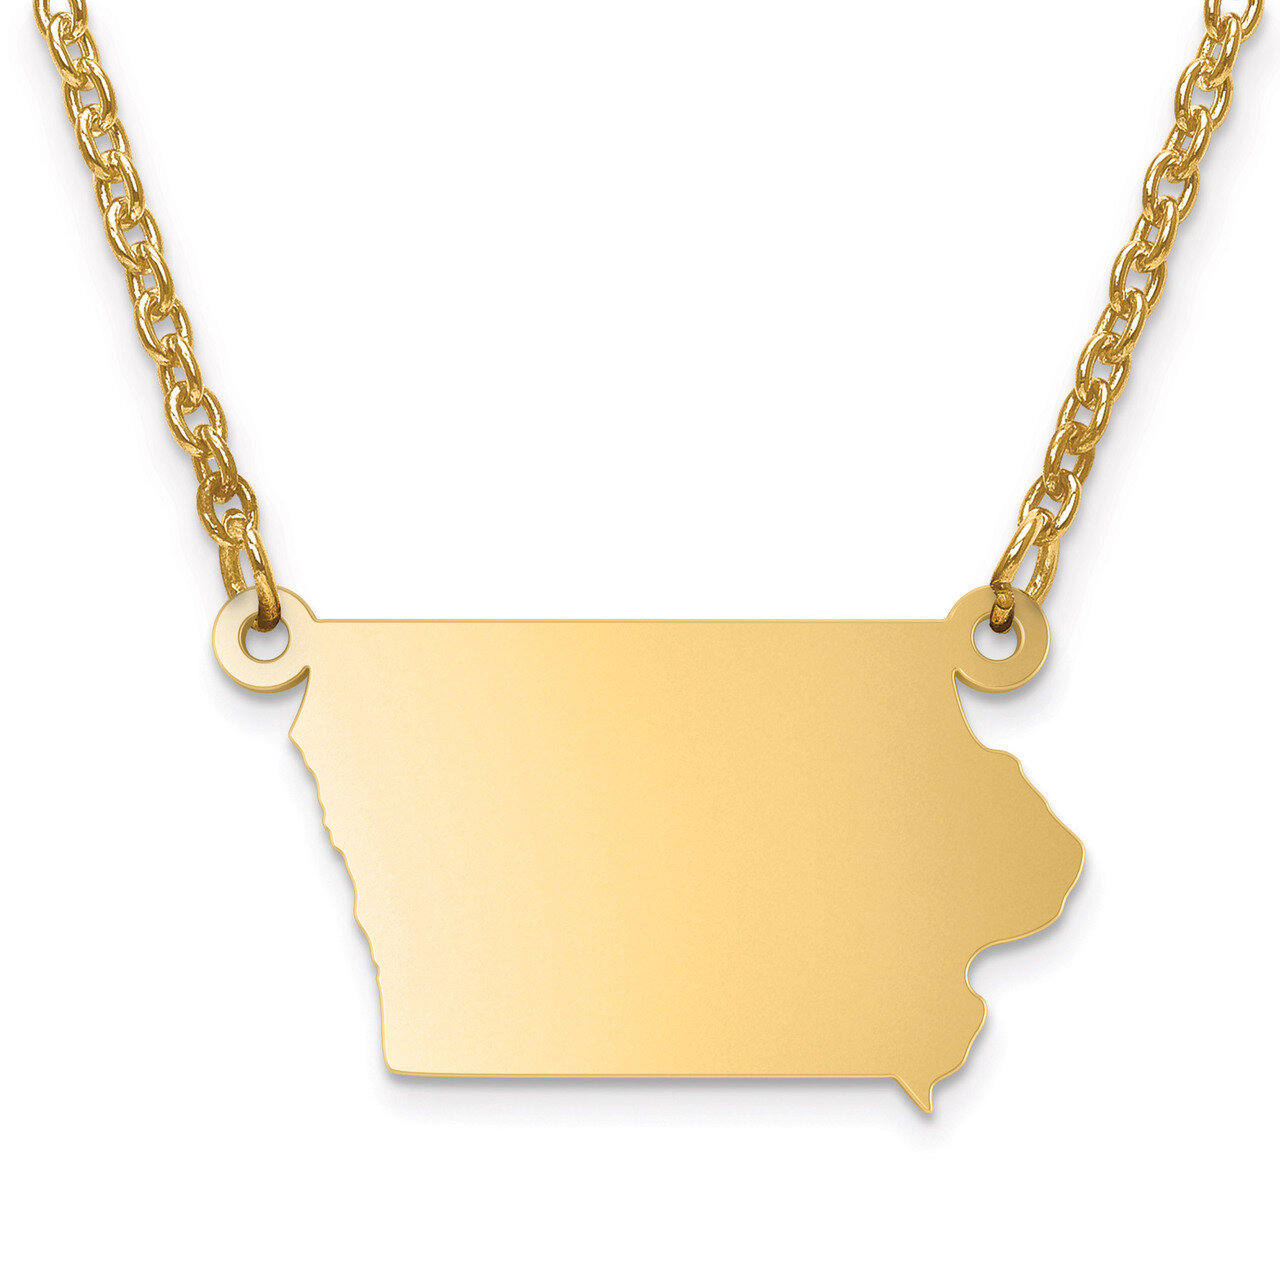 Iowa State Pendant with Chain Engravable Gold-plated on Sterling Silver